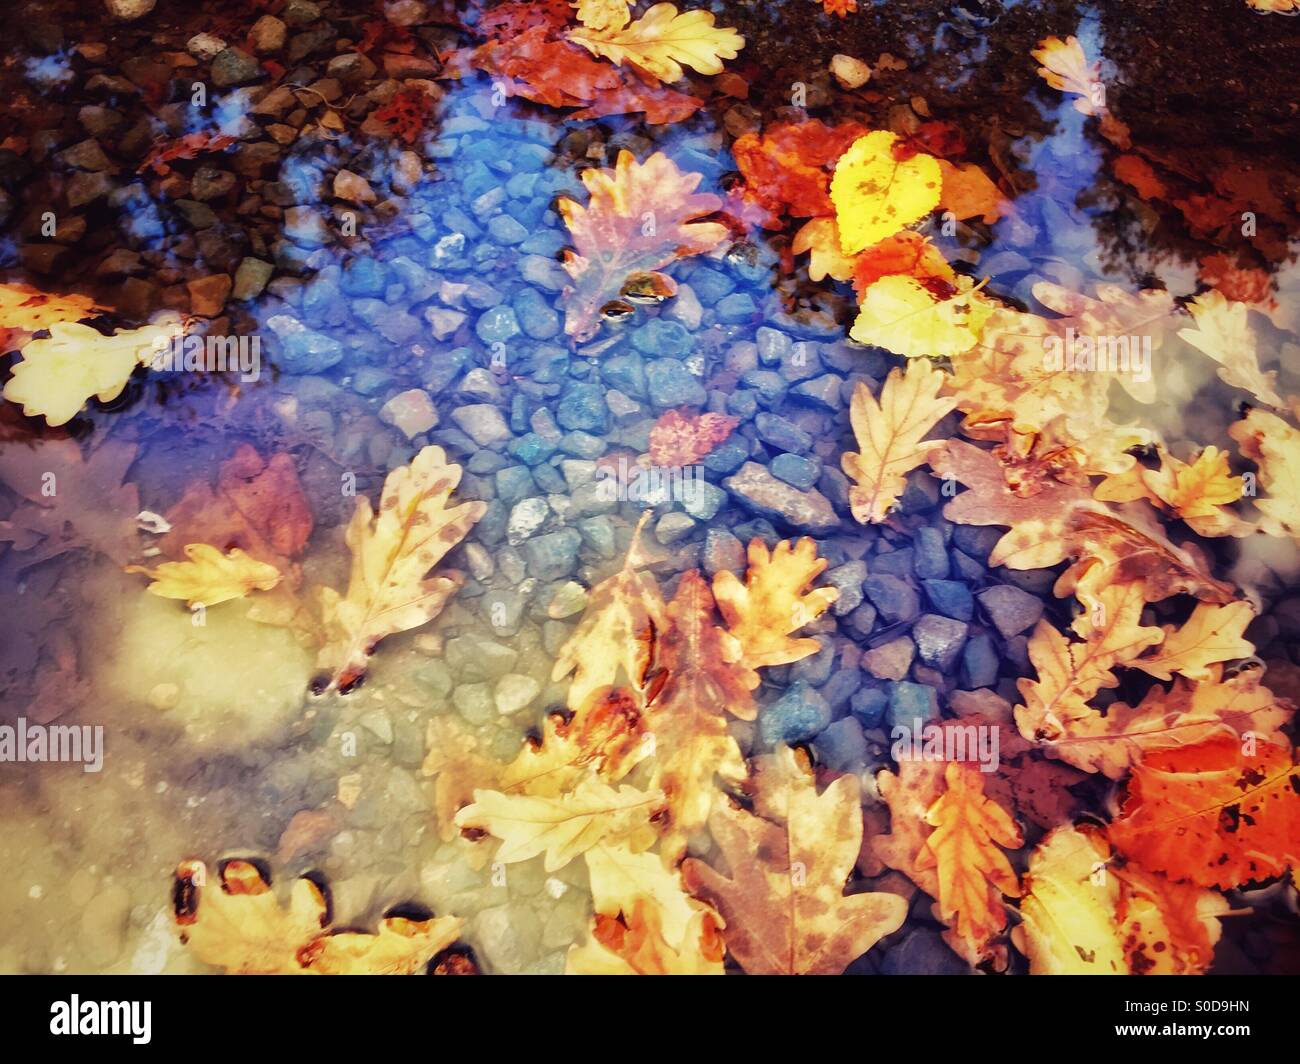 Autumn leaves and pebbles in a puddle Stock Photo